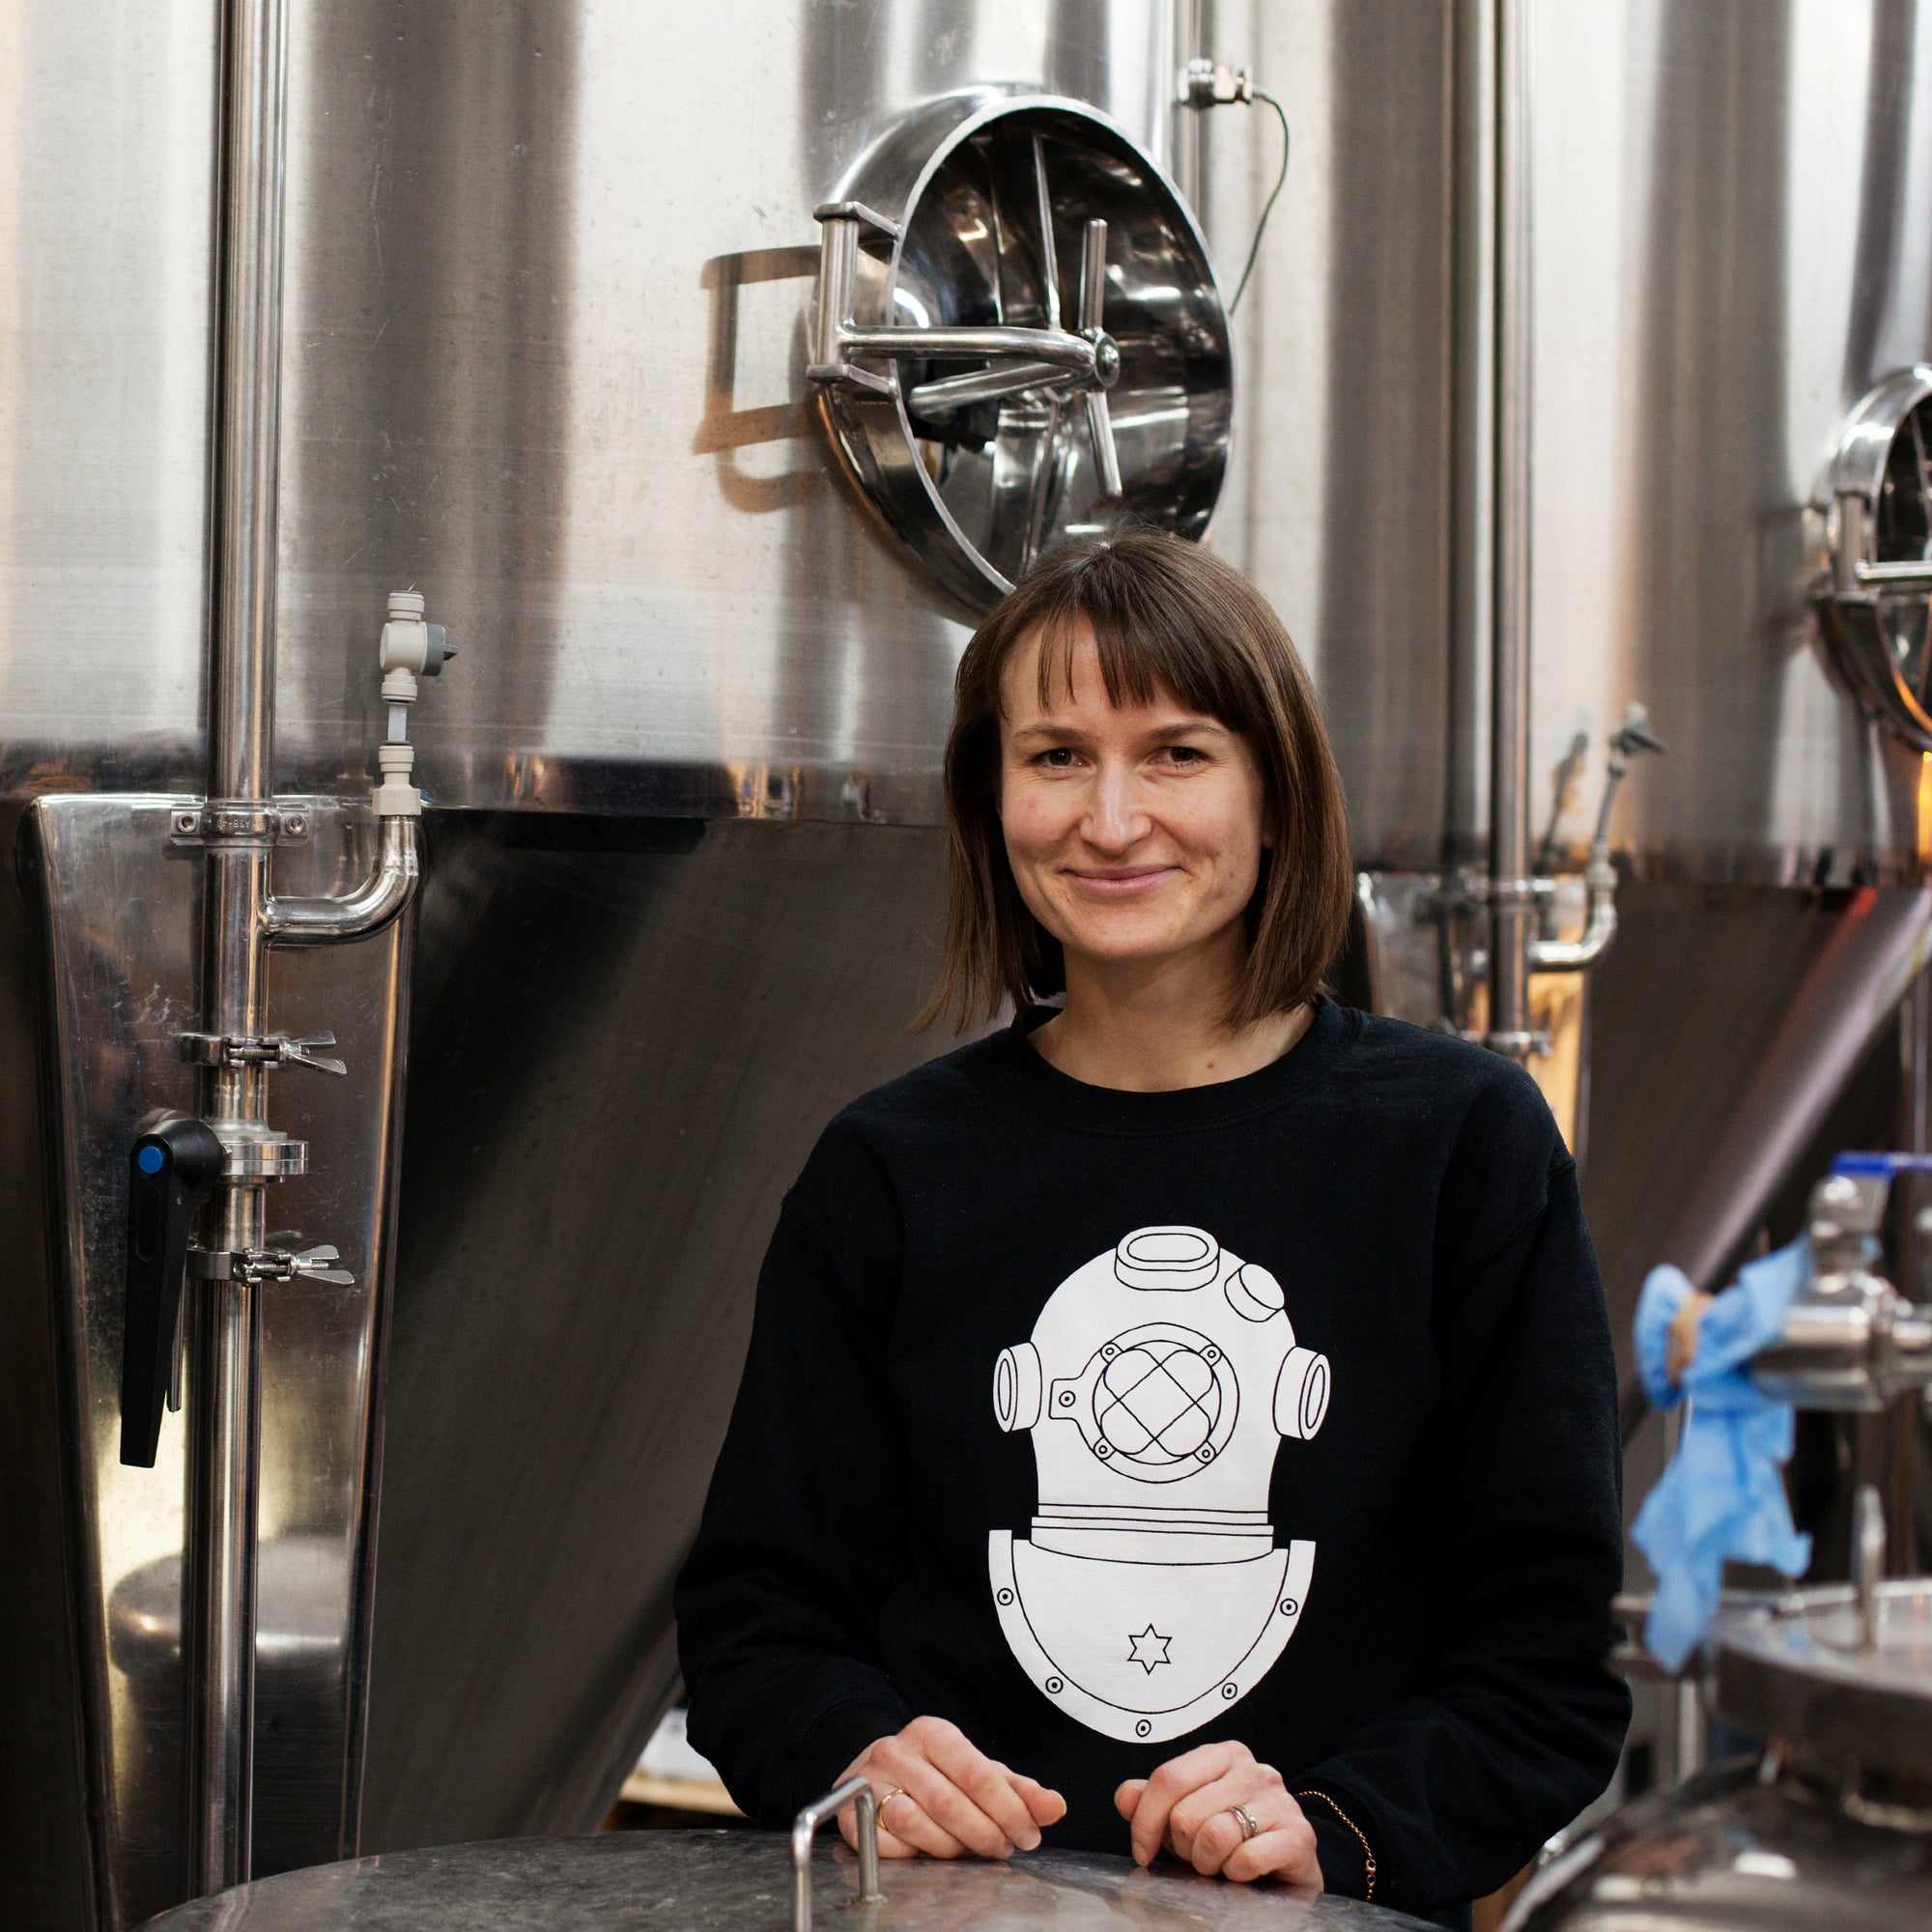 Brewery Work Experience Opportunity: Spend a Day Brewing at Wiper and True this International Women’s Day